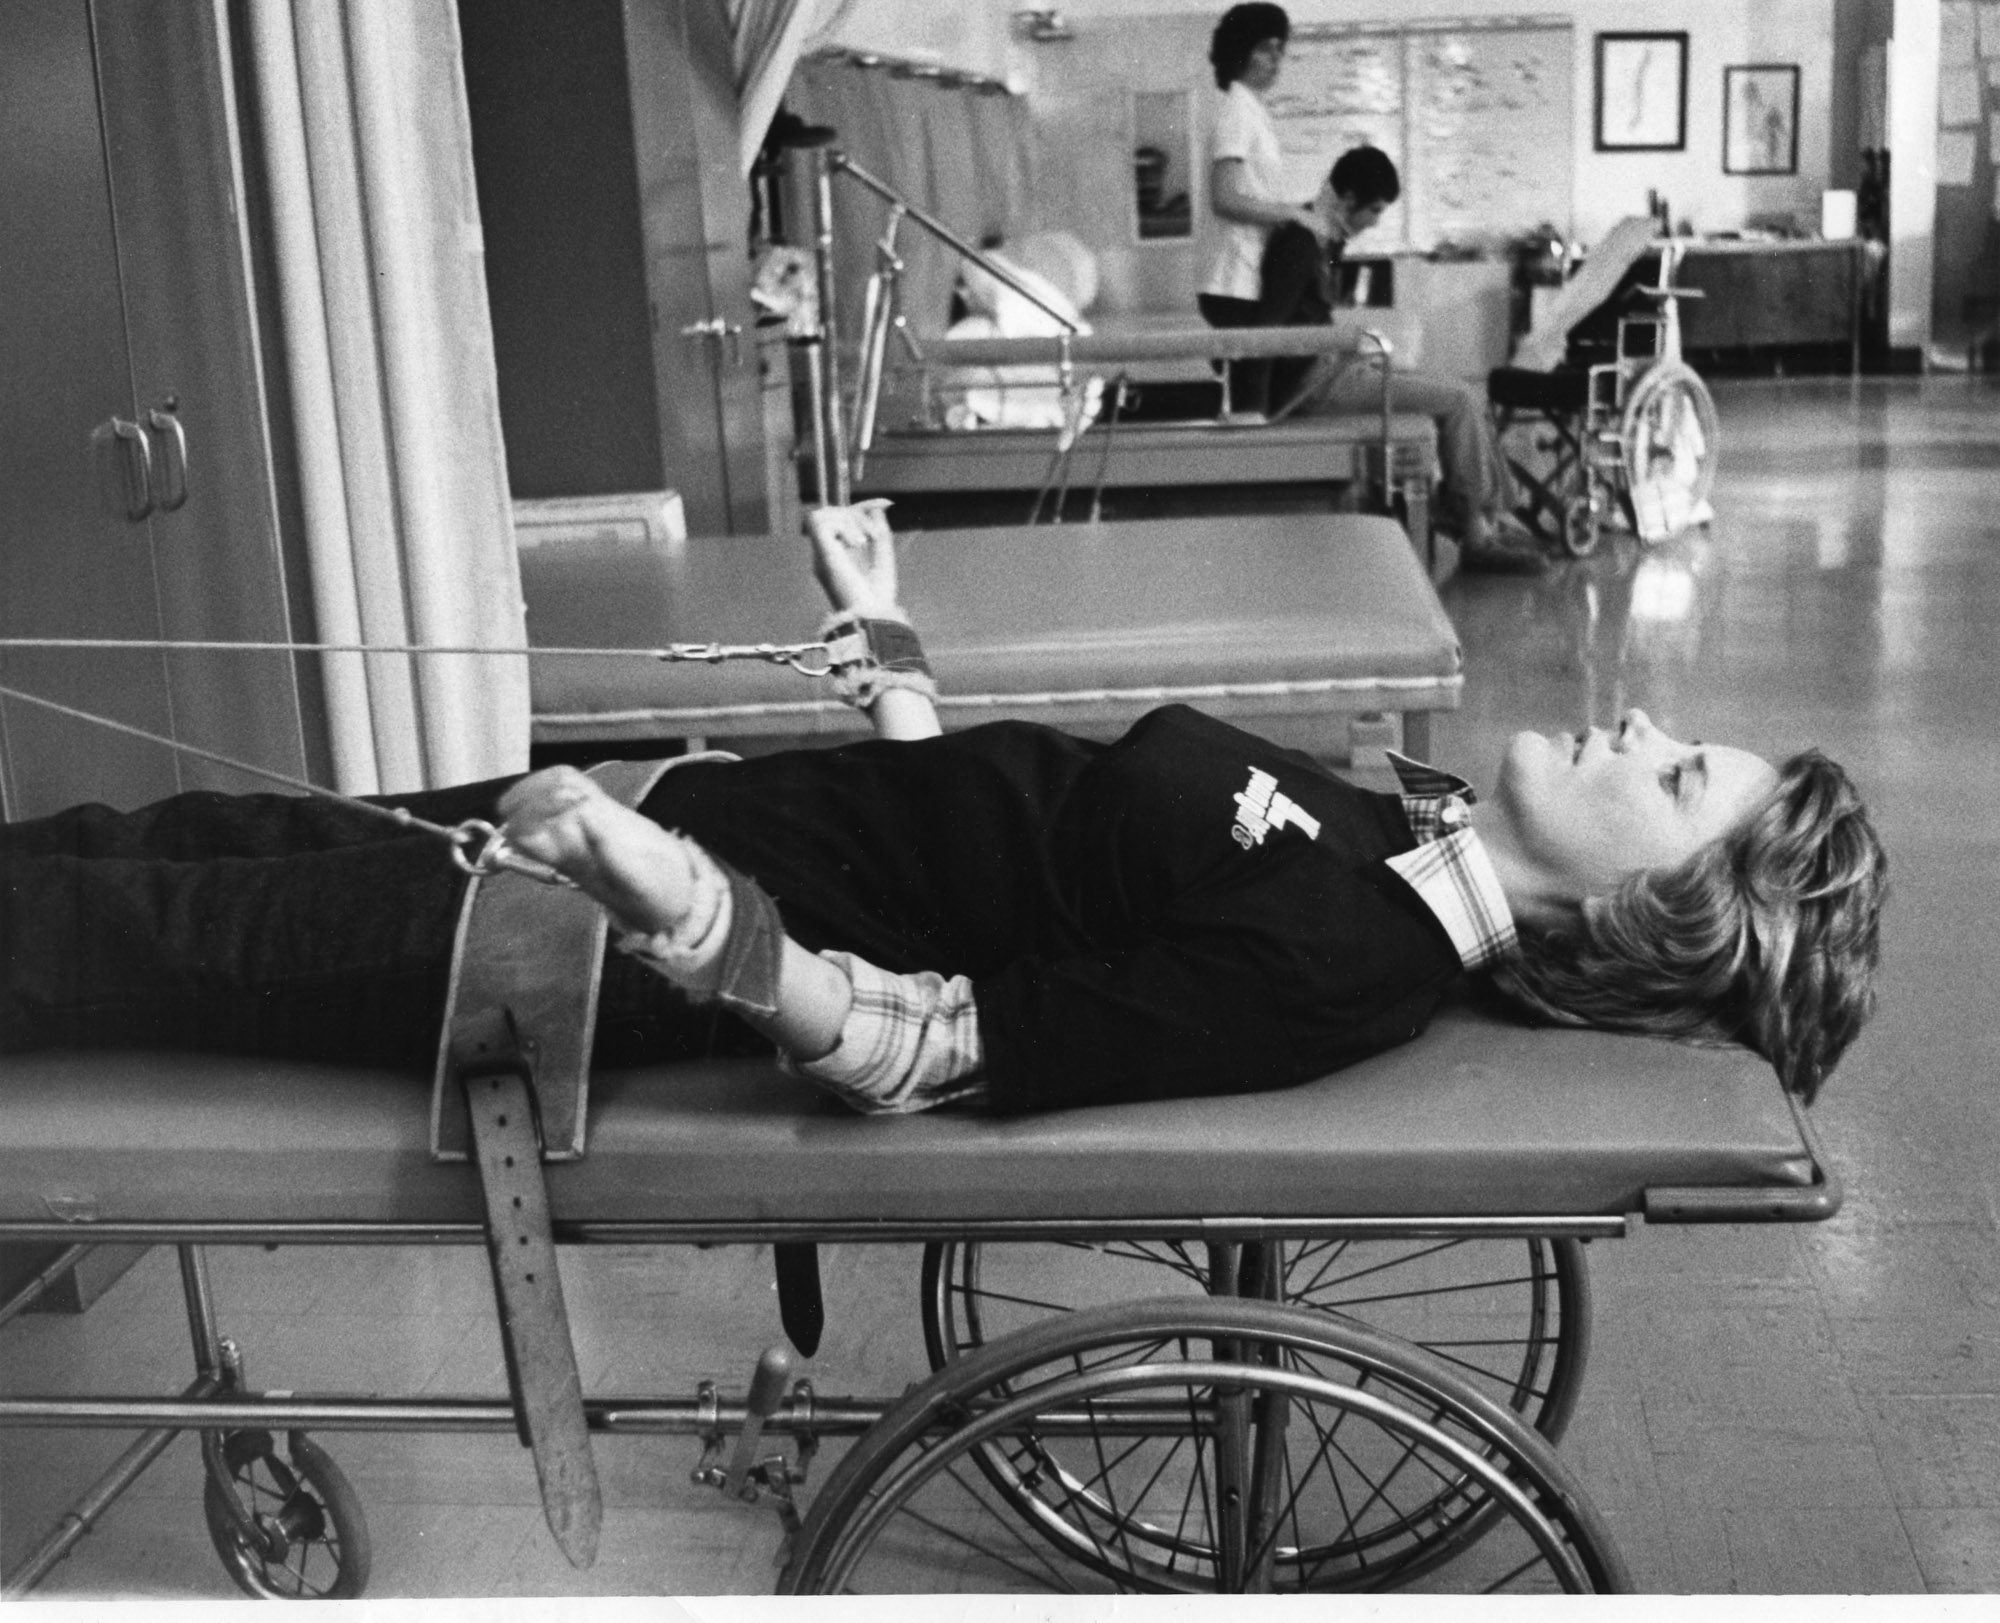 Joni laying on an exercise machine she used during her initial physical therapy after her accident.